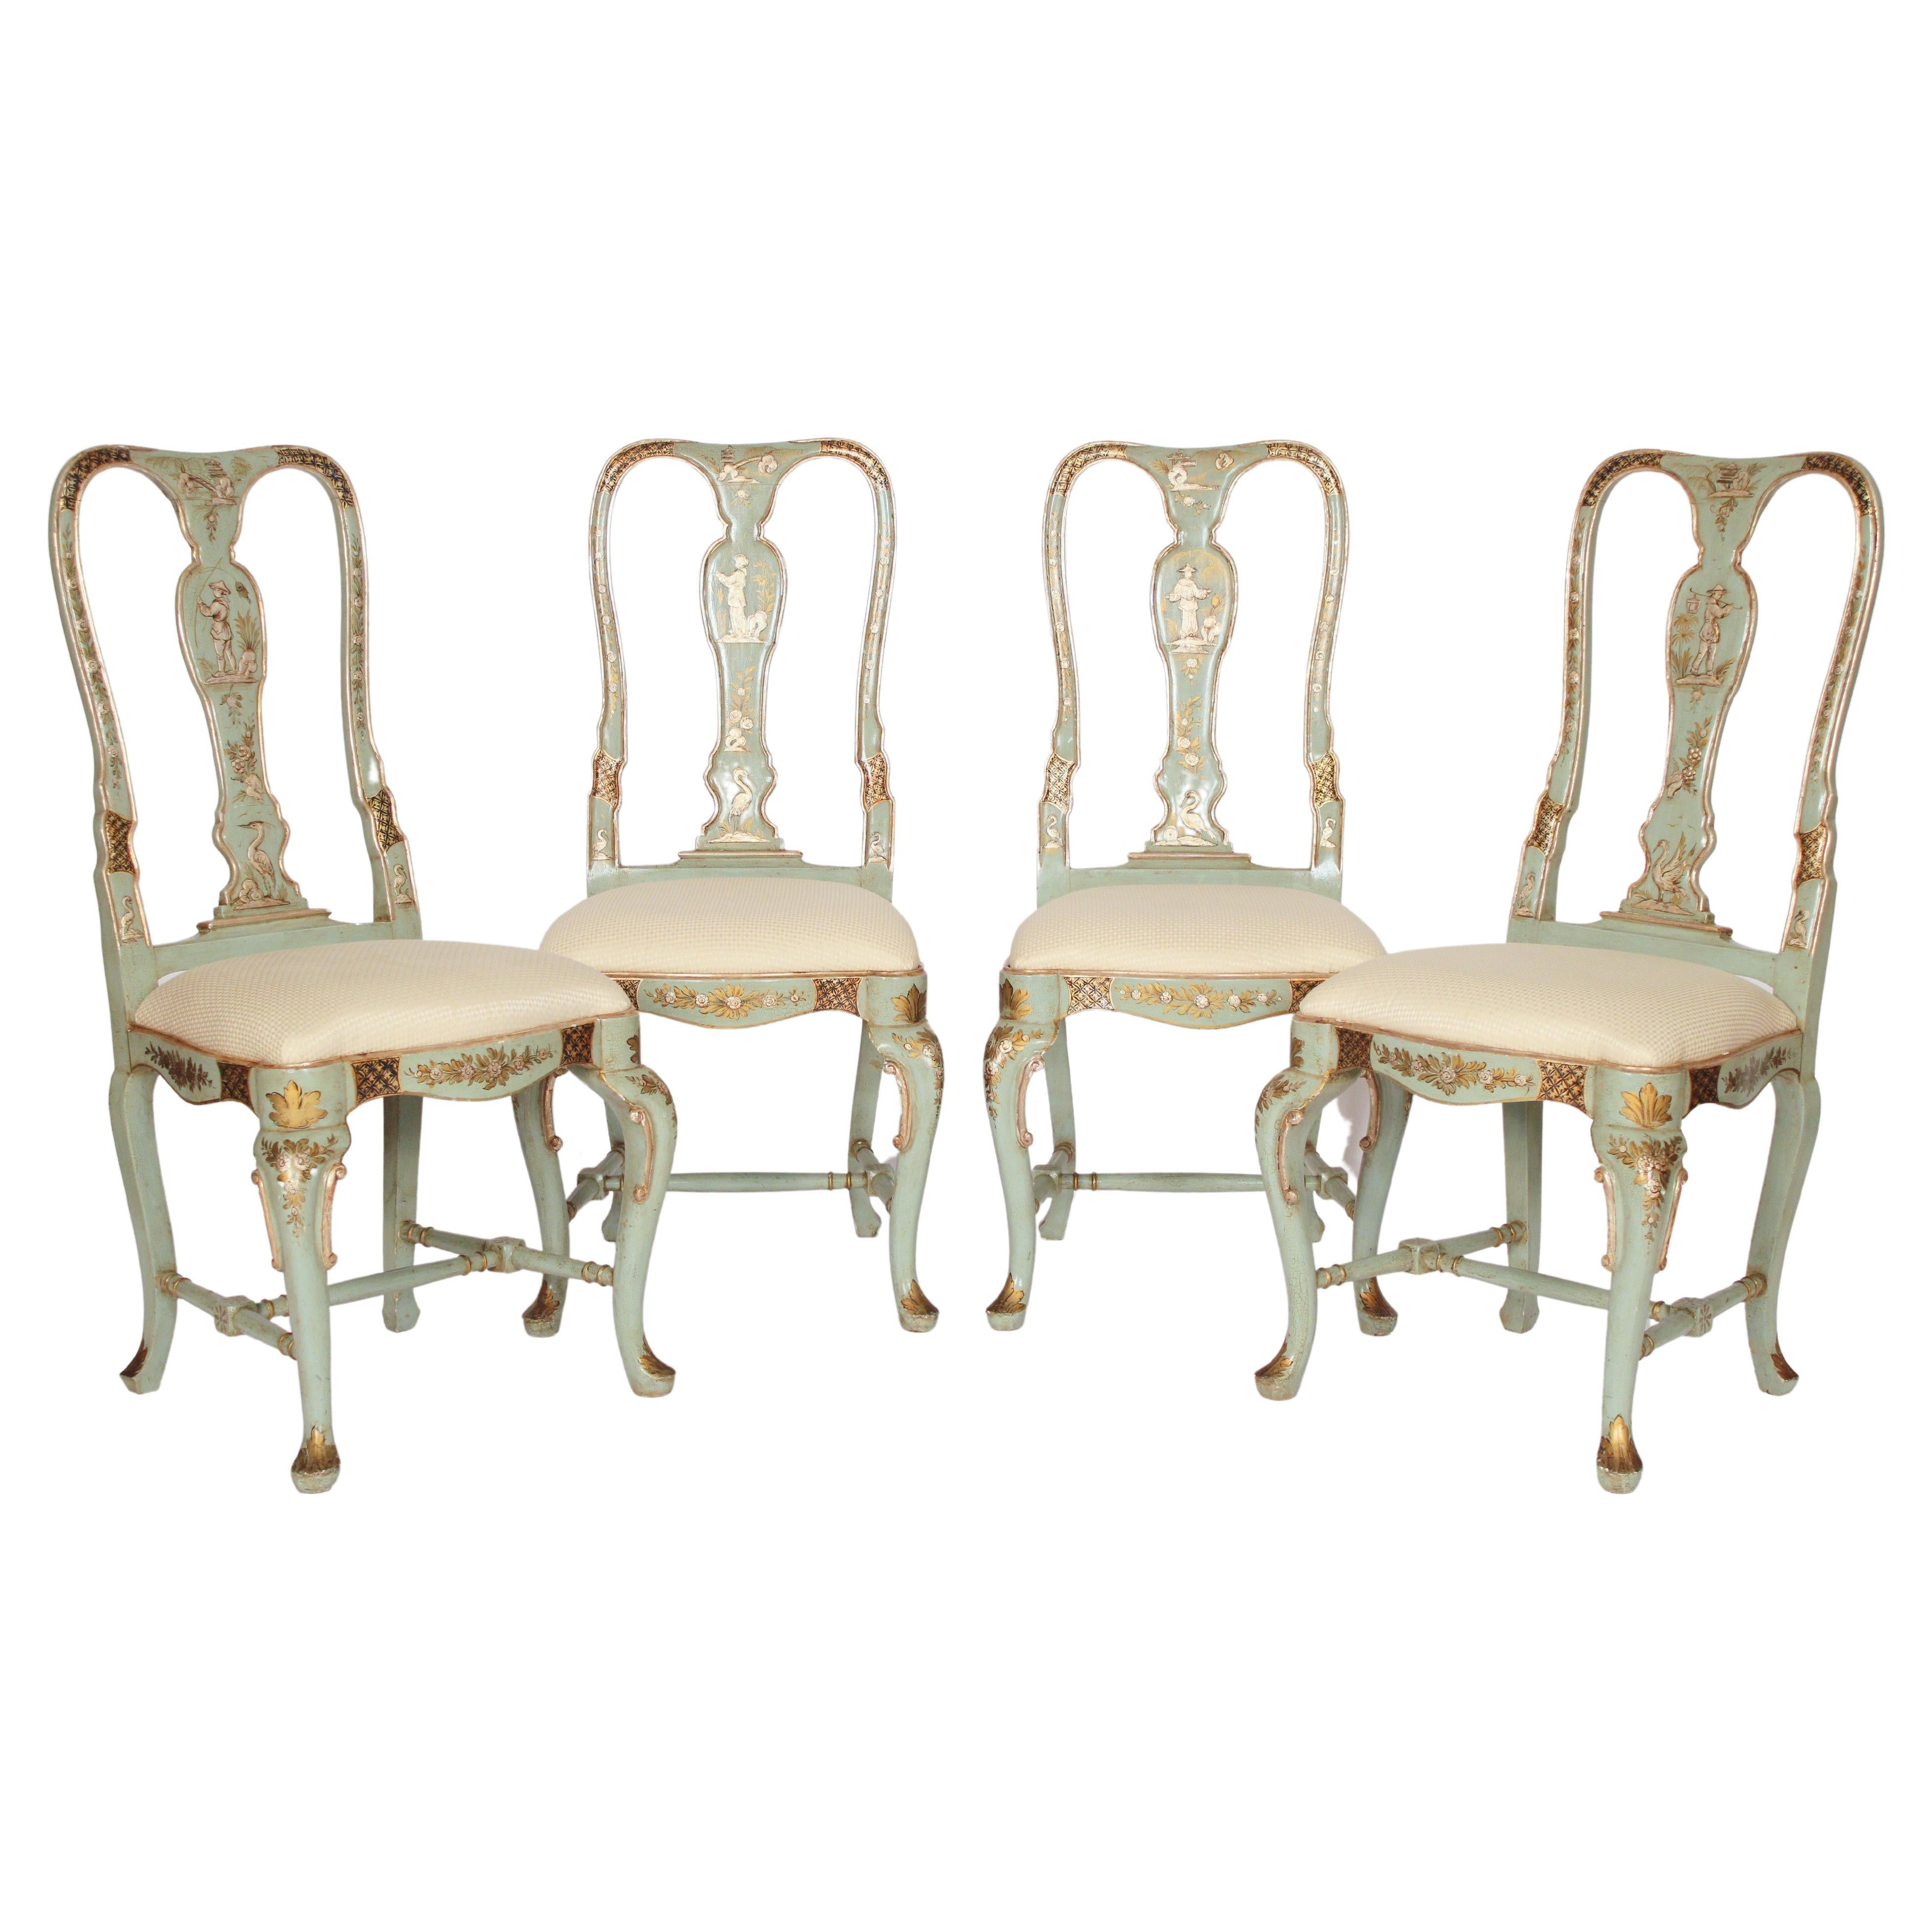 Set of 4 Queen Anne Style Chinoiserie Decorated Side Chairs For Sale